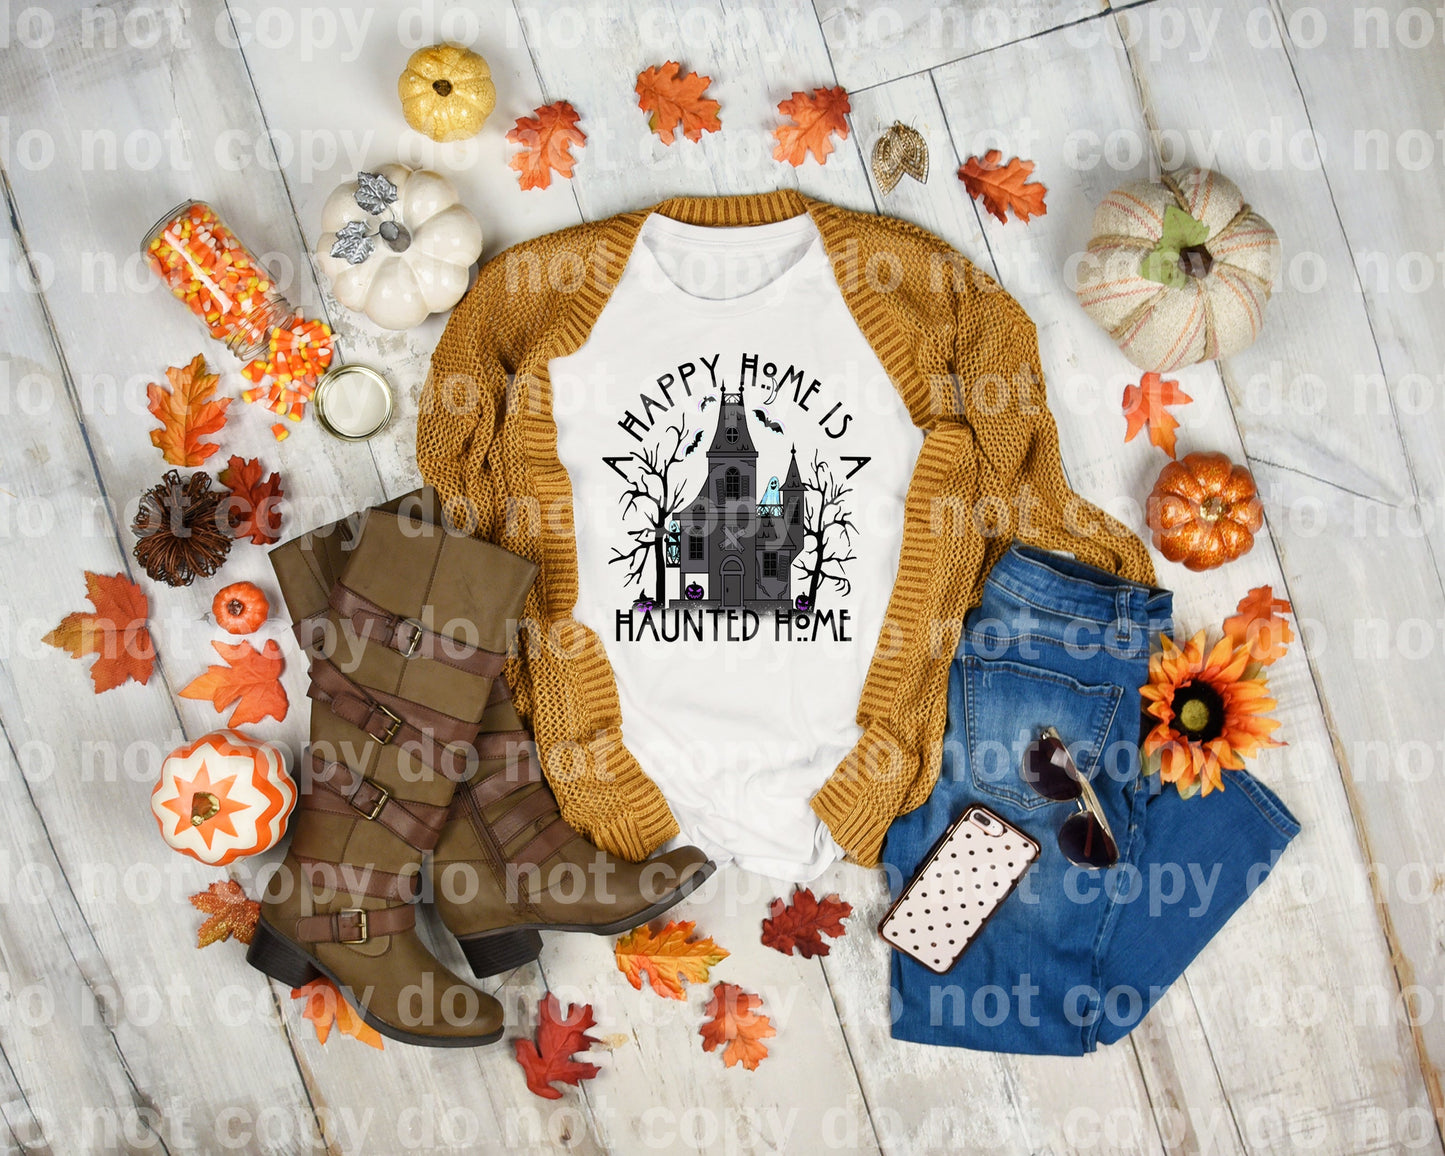 A Happy Home Is A Haunted Home Dream Print or Sublimation Print